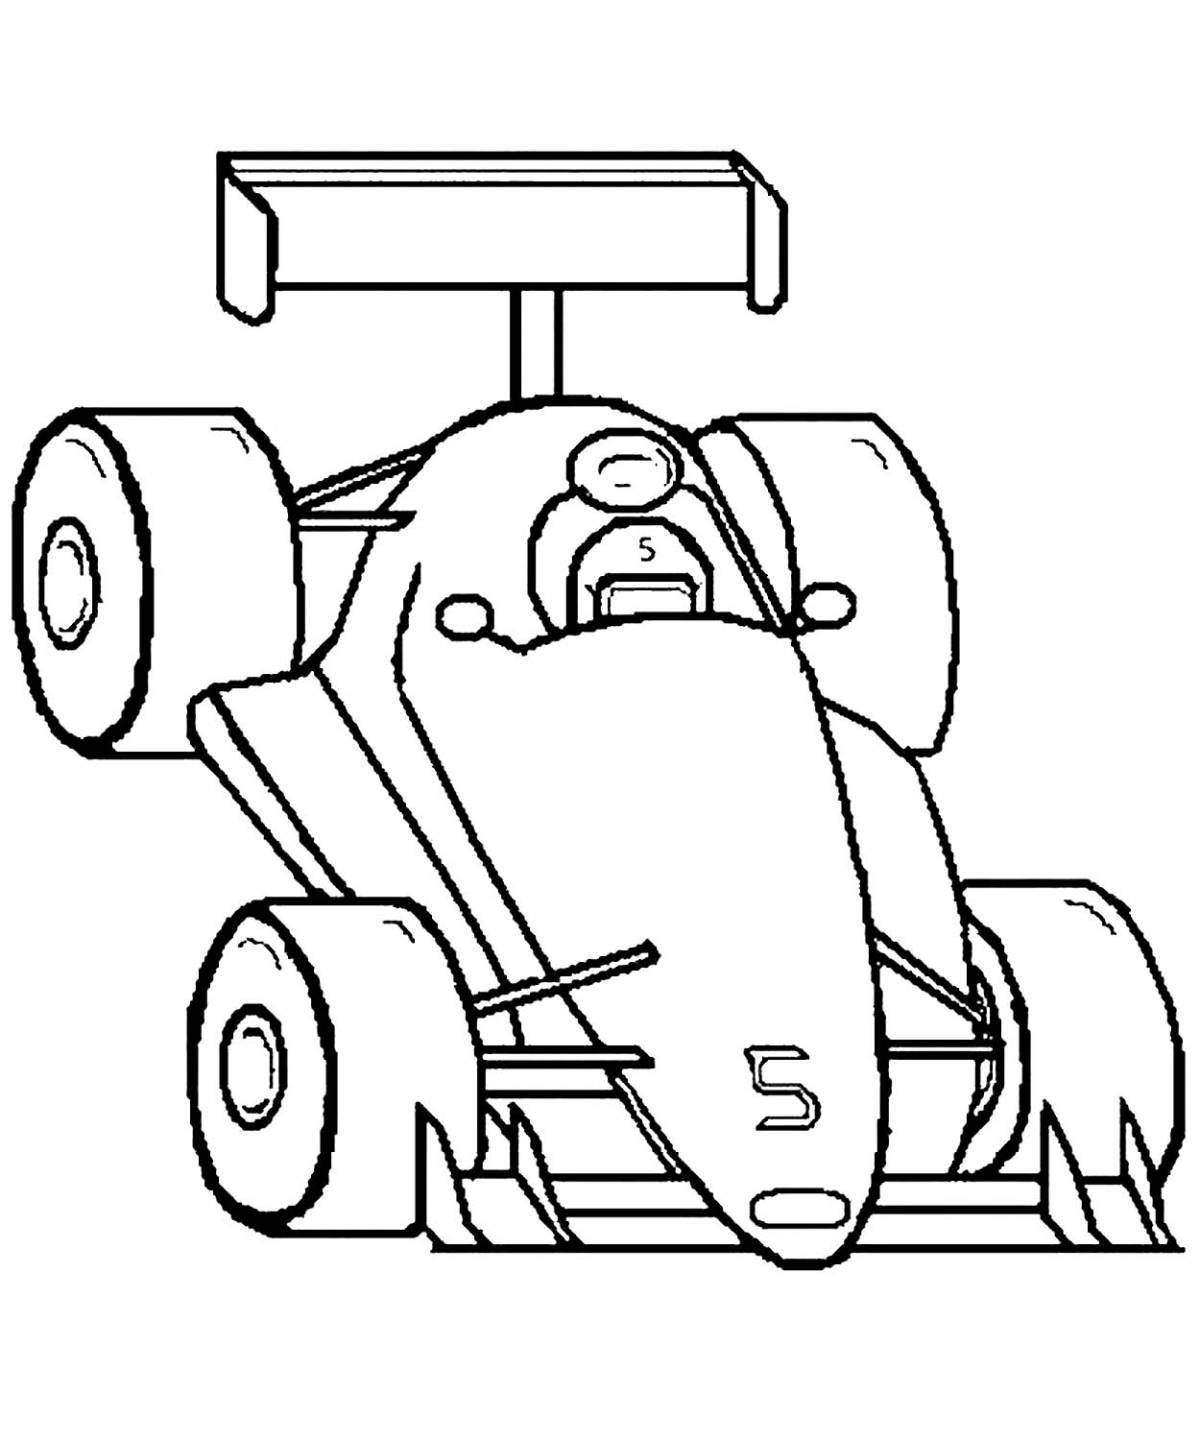 Fantastic racing car coloring book for 6-7 year olds